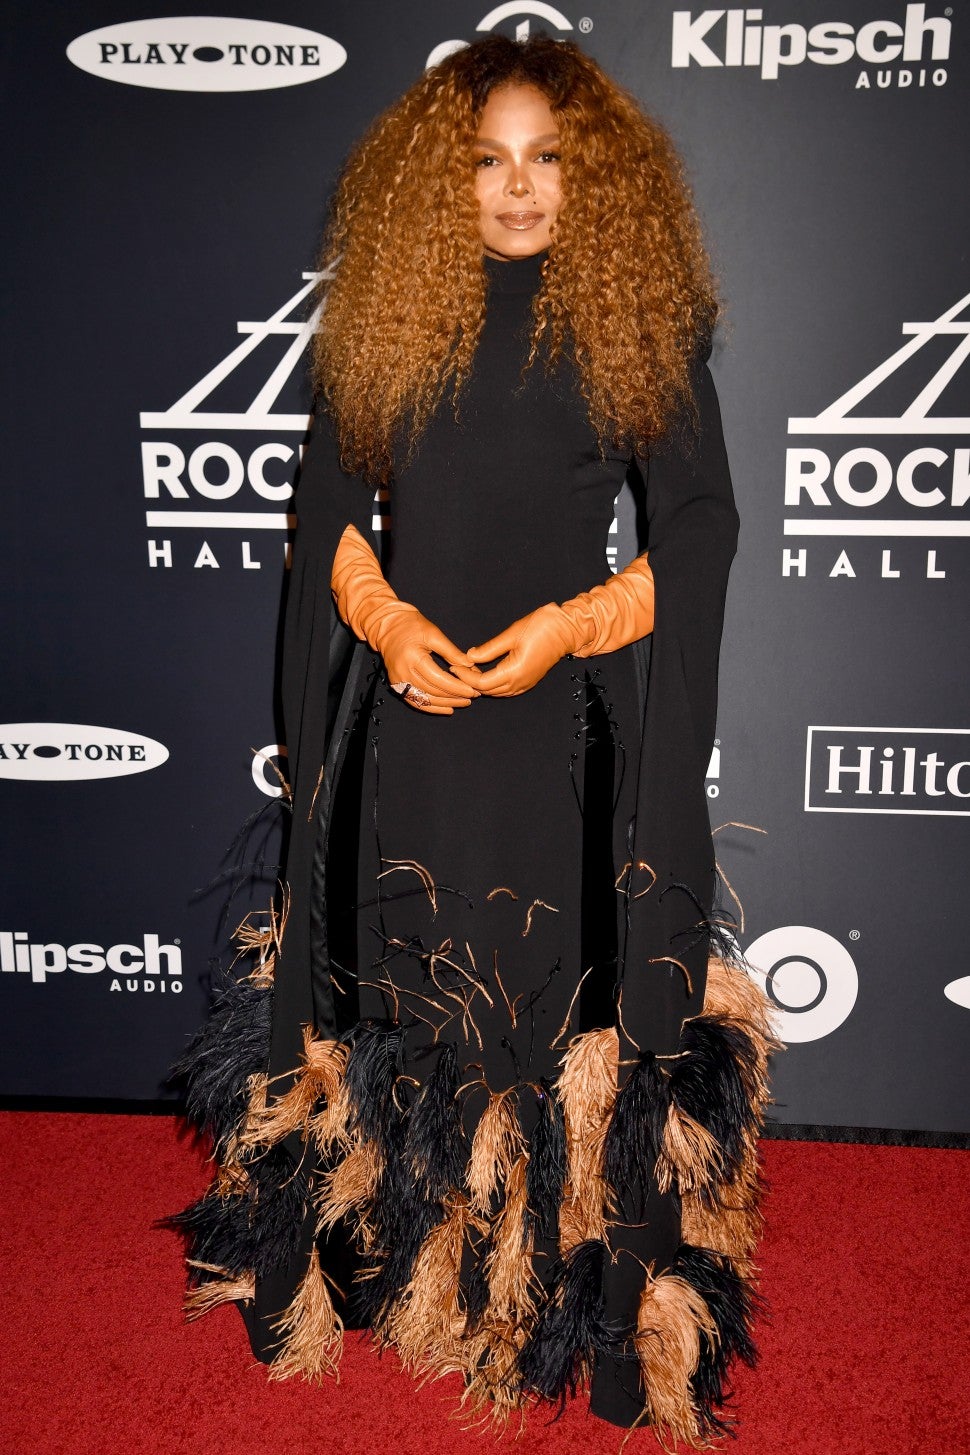 Janet Janet Rock and Roll Hall of Fame